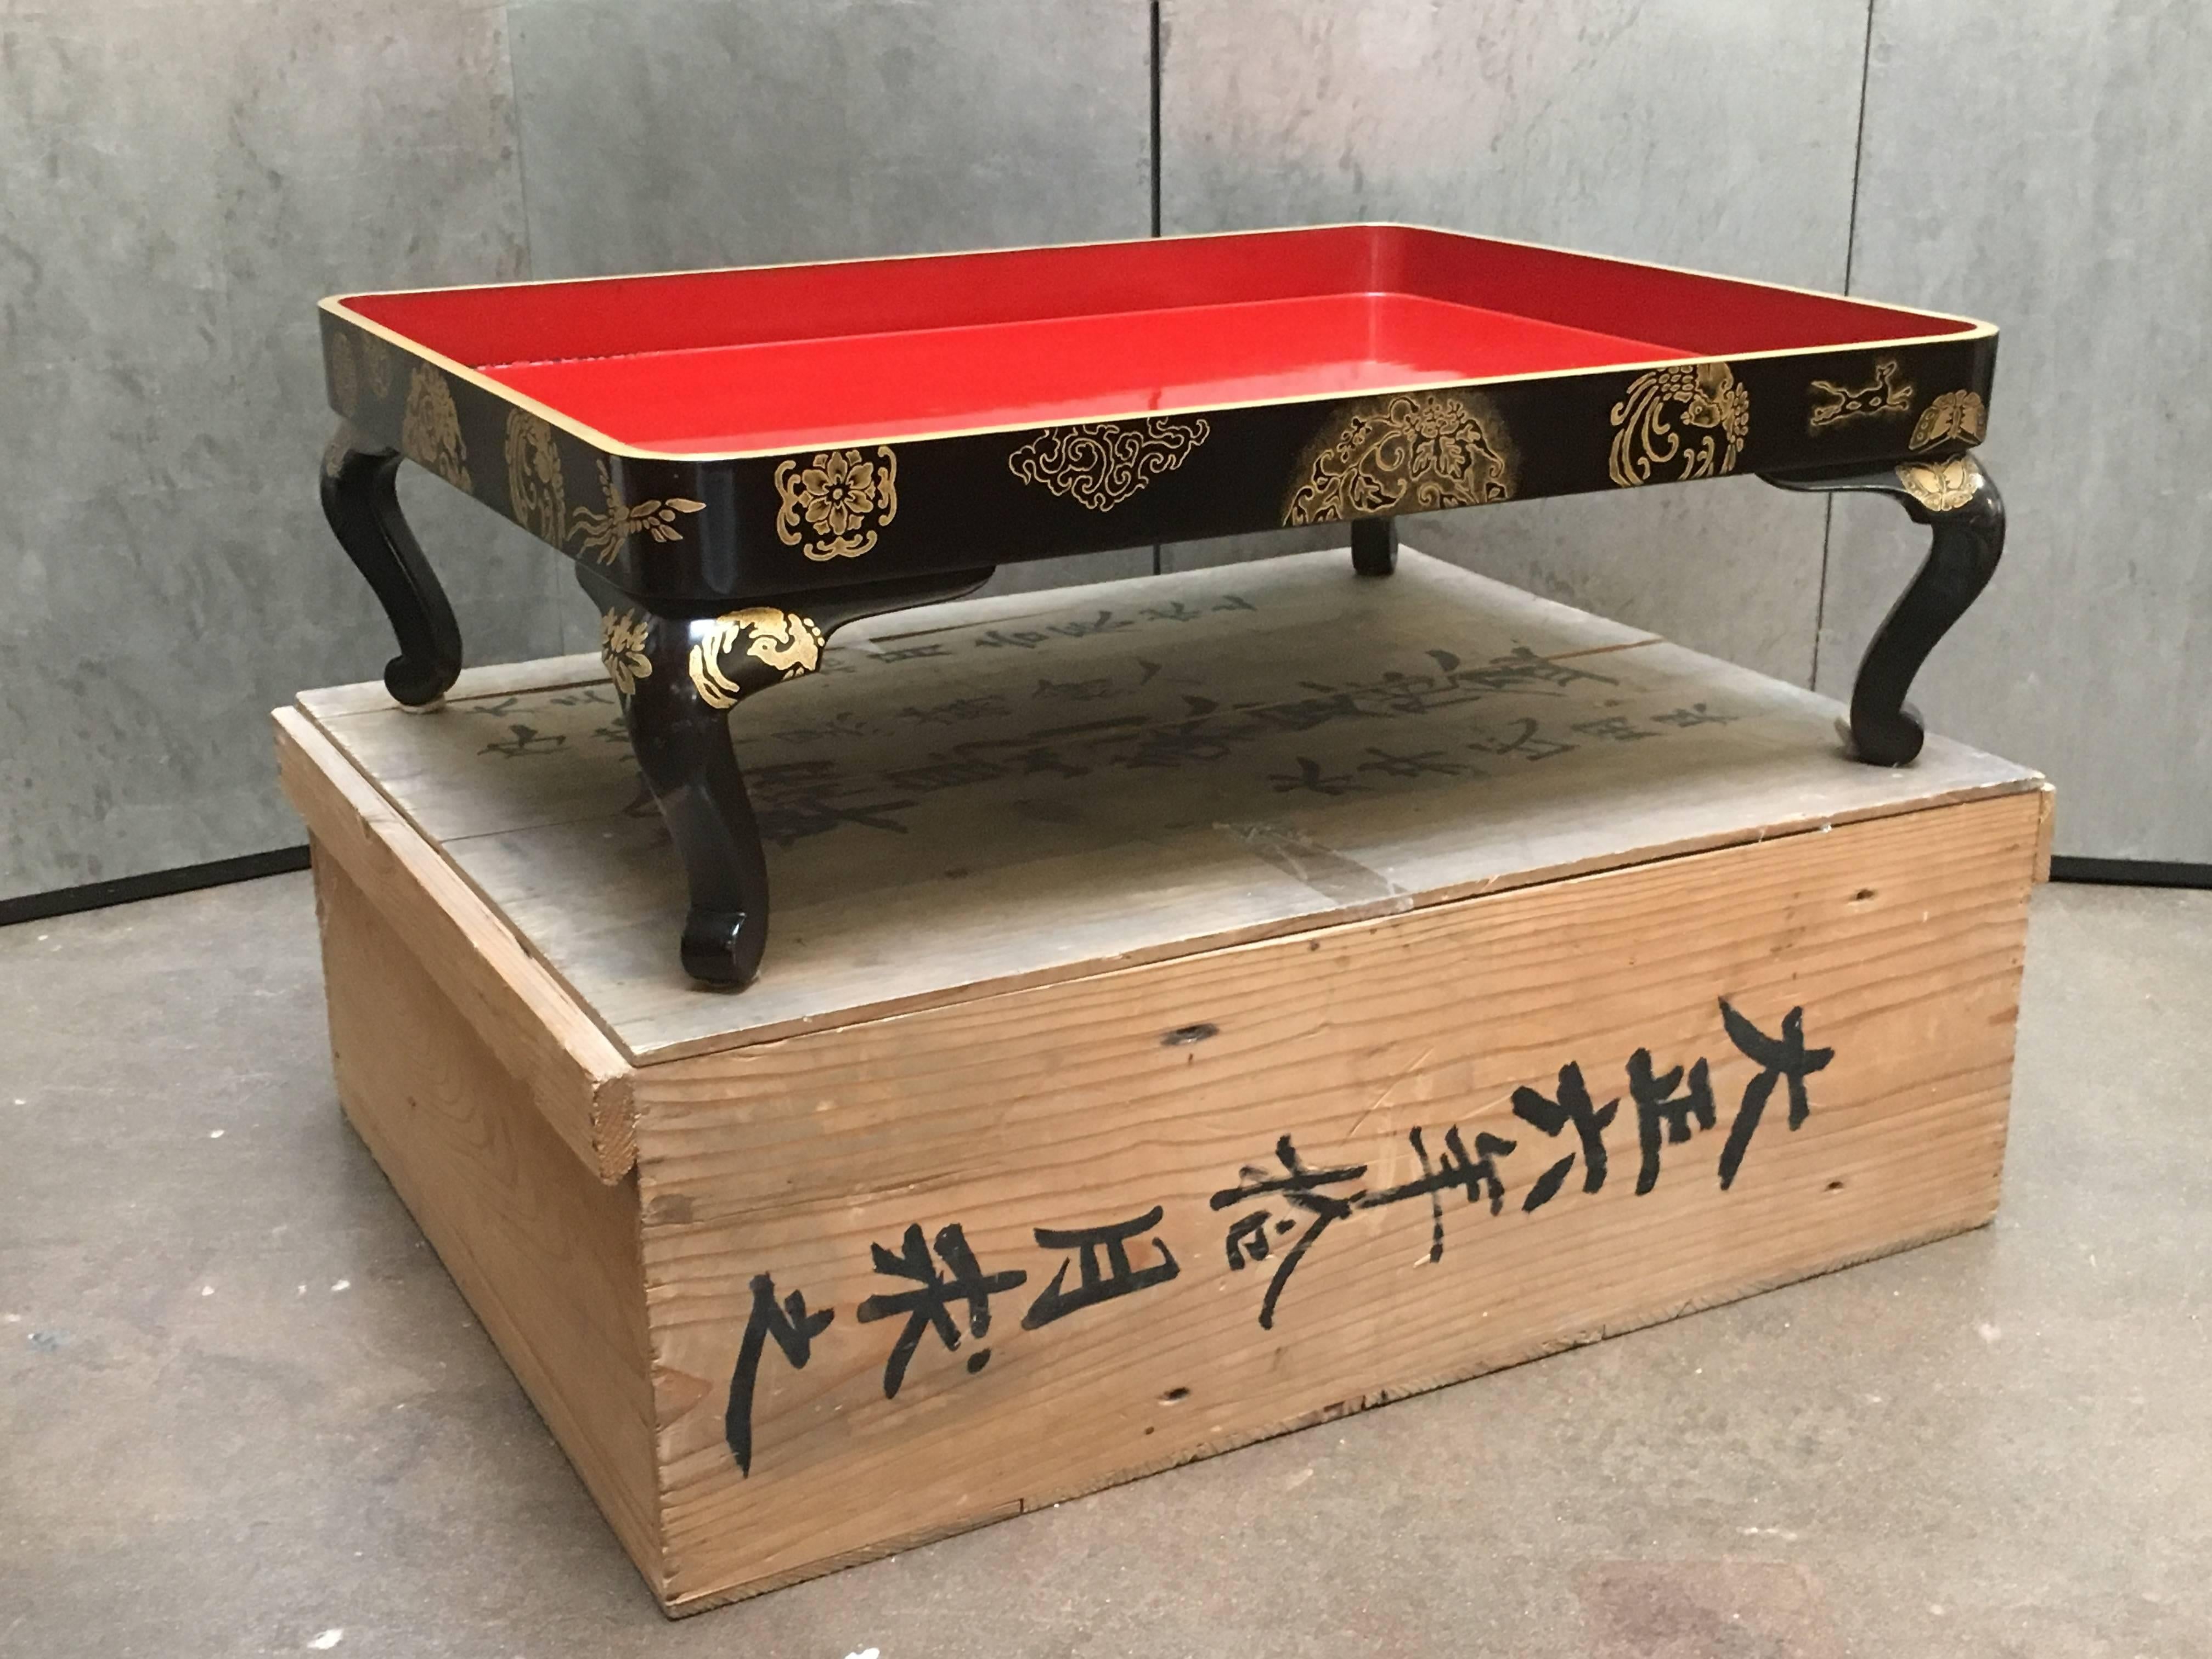 A fine Japanese red and black maki-e lacquer presentation tray with original tomobako storage box, Taisho period, dated 1917, Japan.

The large presentation tray set on cabriole legs and decorated with maki-e (gold dust) designs of various stylized